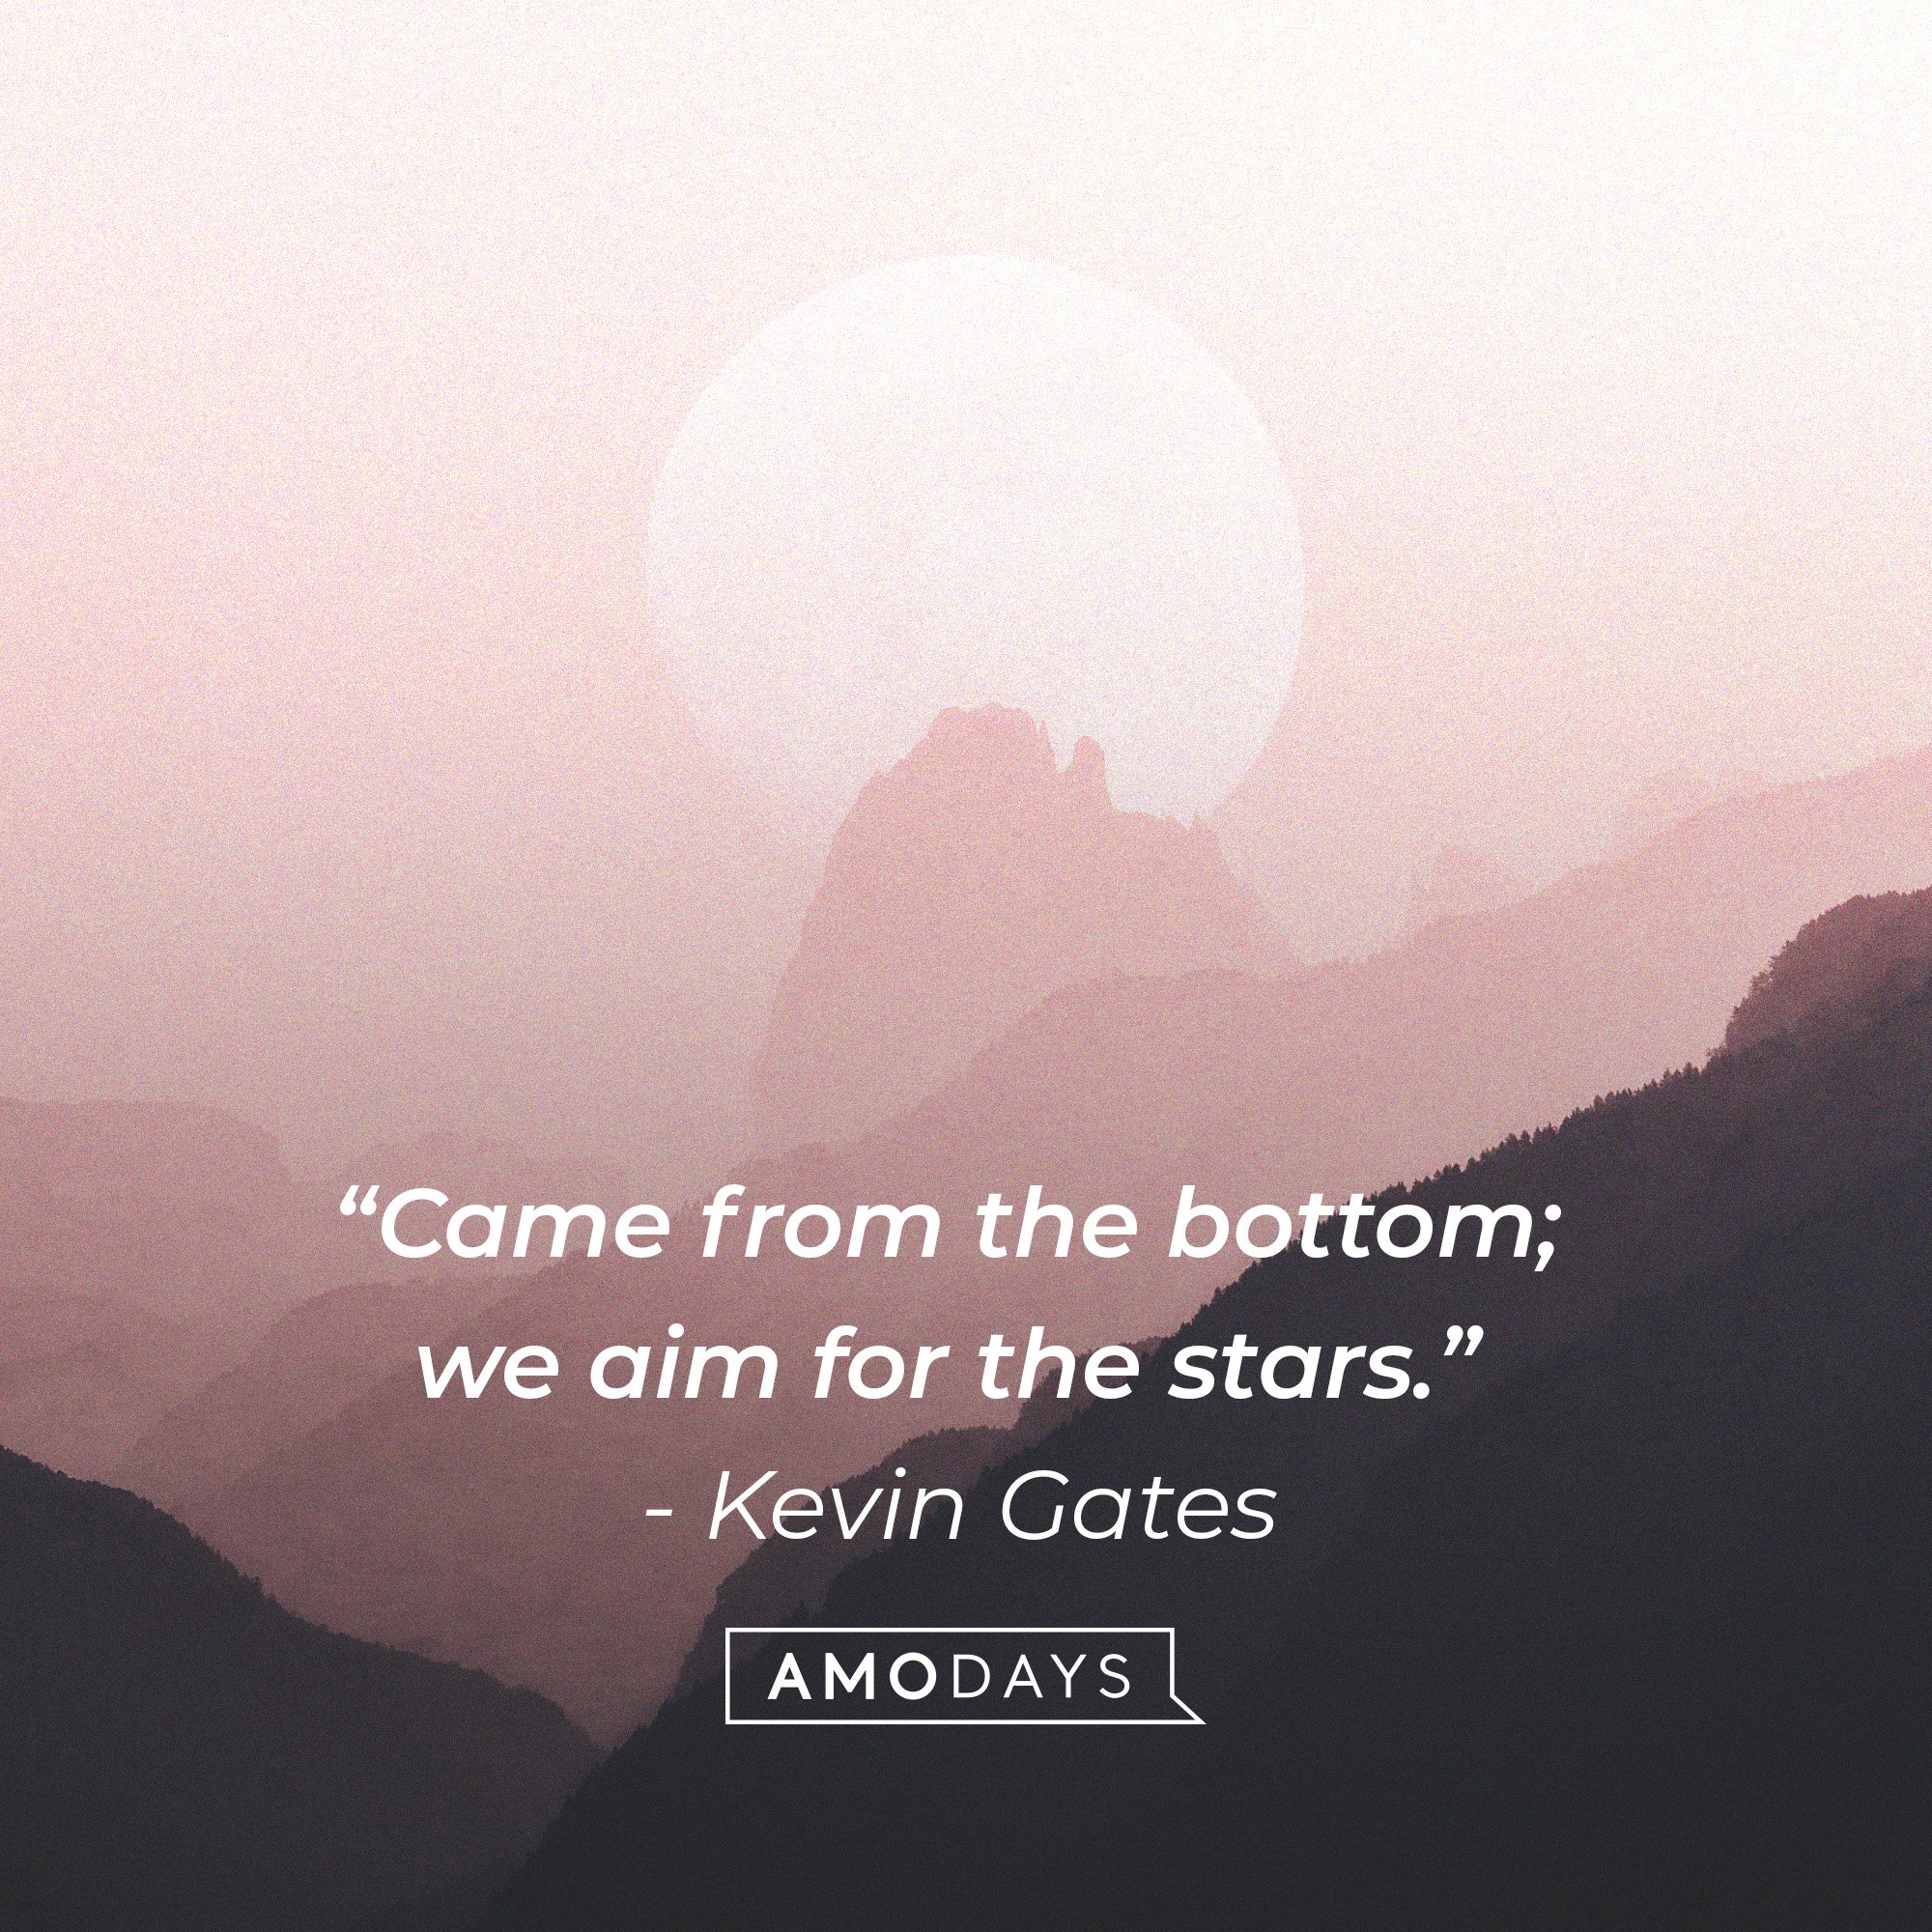 Kevin Gates’ quote: “Came from the bottom; we aim for the stars.” | Image: AmoDays